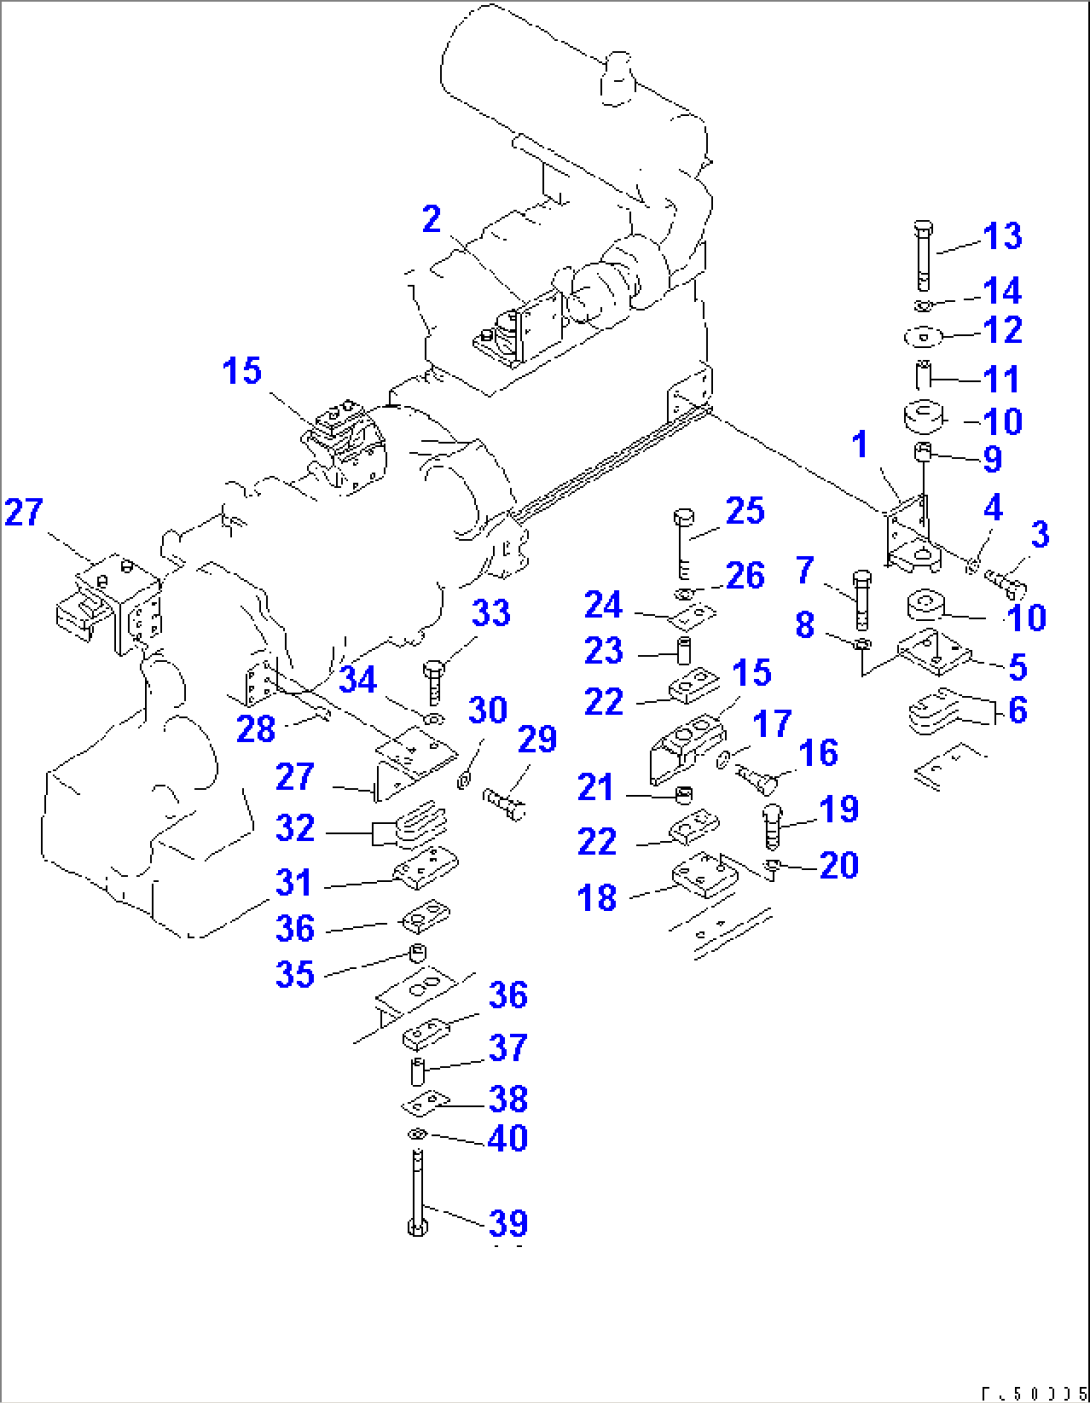 ENGINE AND TRANSMISSION MOUNTING PARTS(#6001-6690)